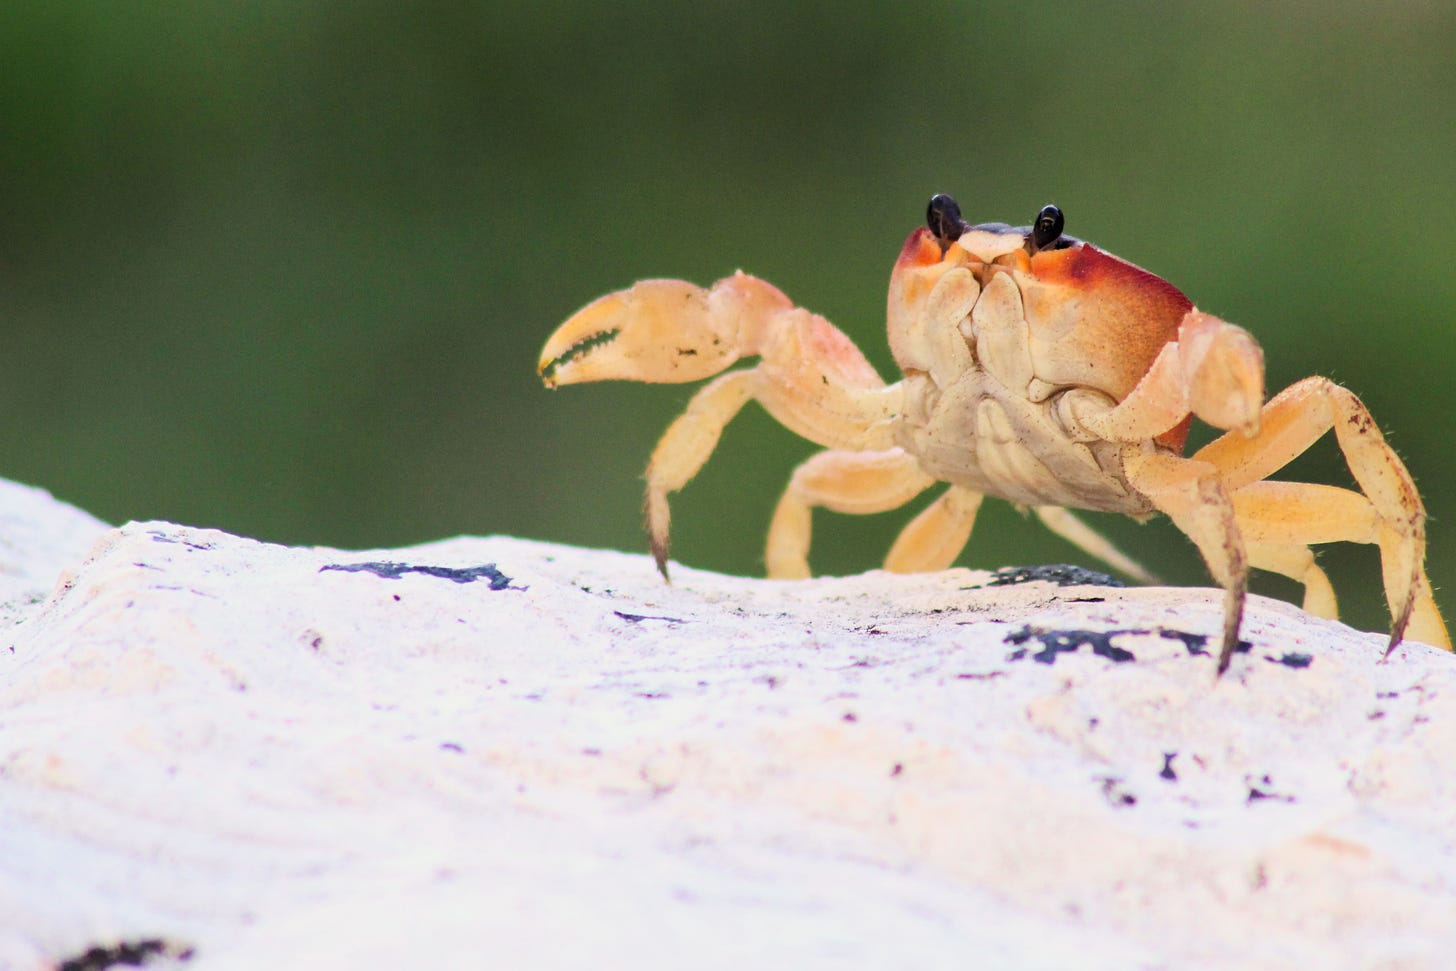 A crab with pale yellow legs and claws and brown eyes walking on white sand